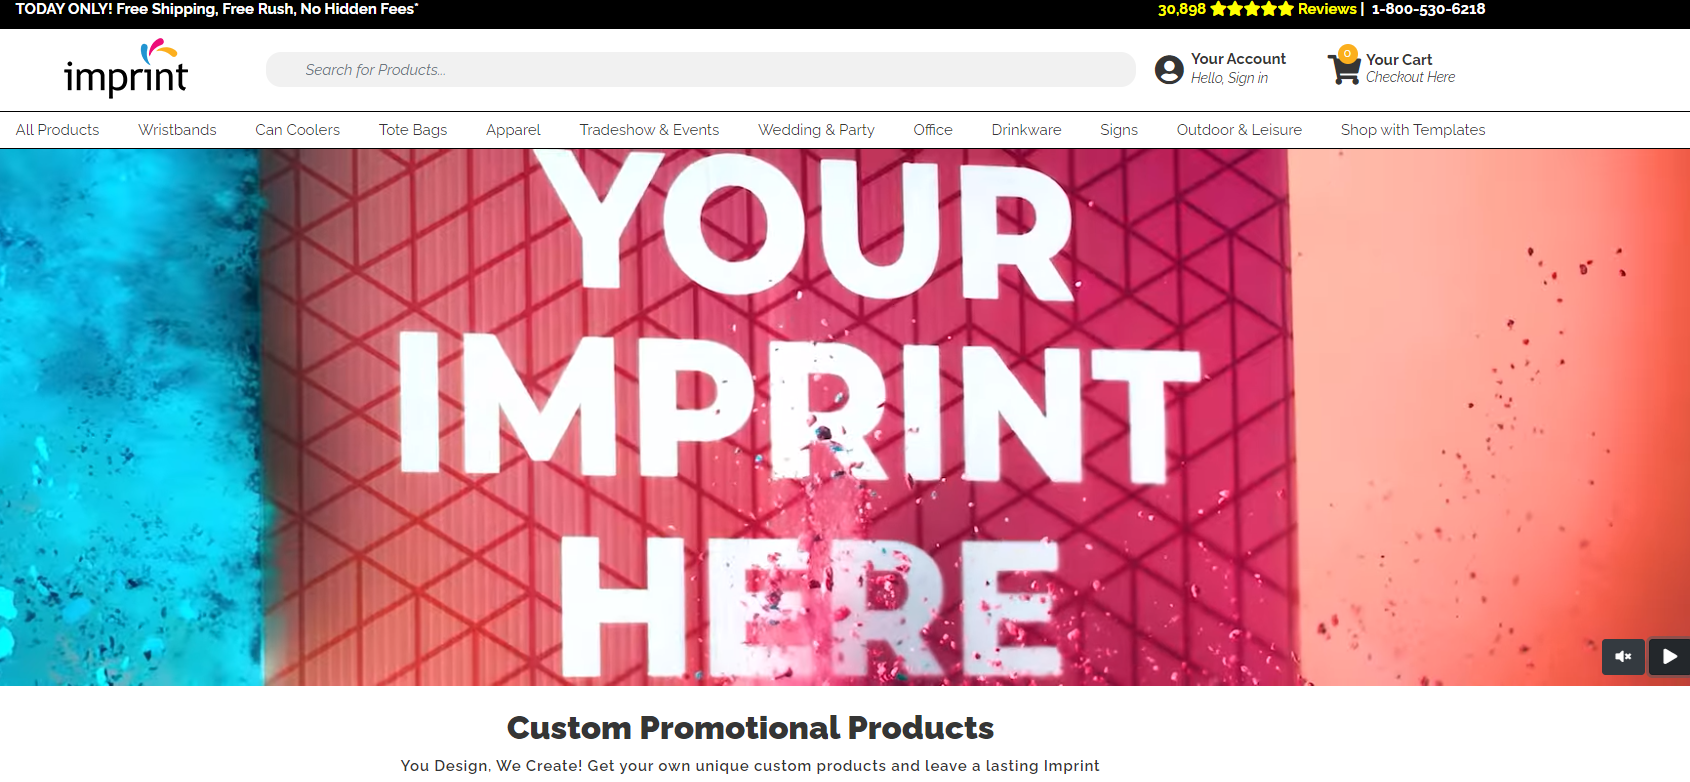 imprint custom promotional products